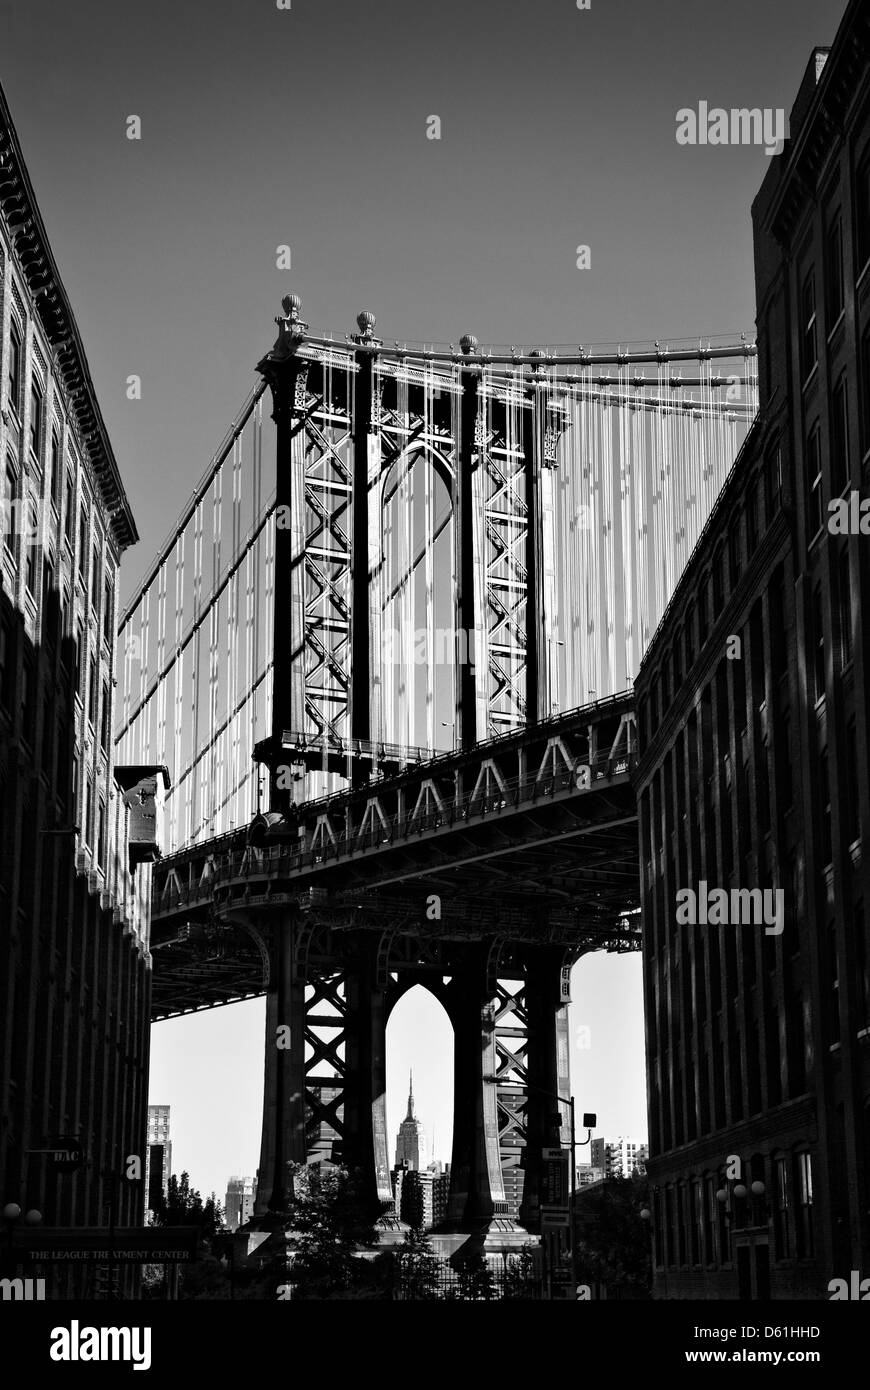 Manhattan Bridge, view from Brooklyn Heights, New York, United States of America - Image taken from public ground Stock Photo